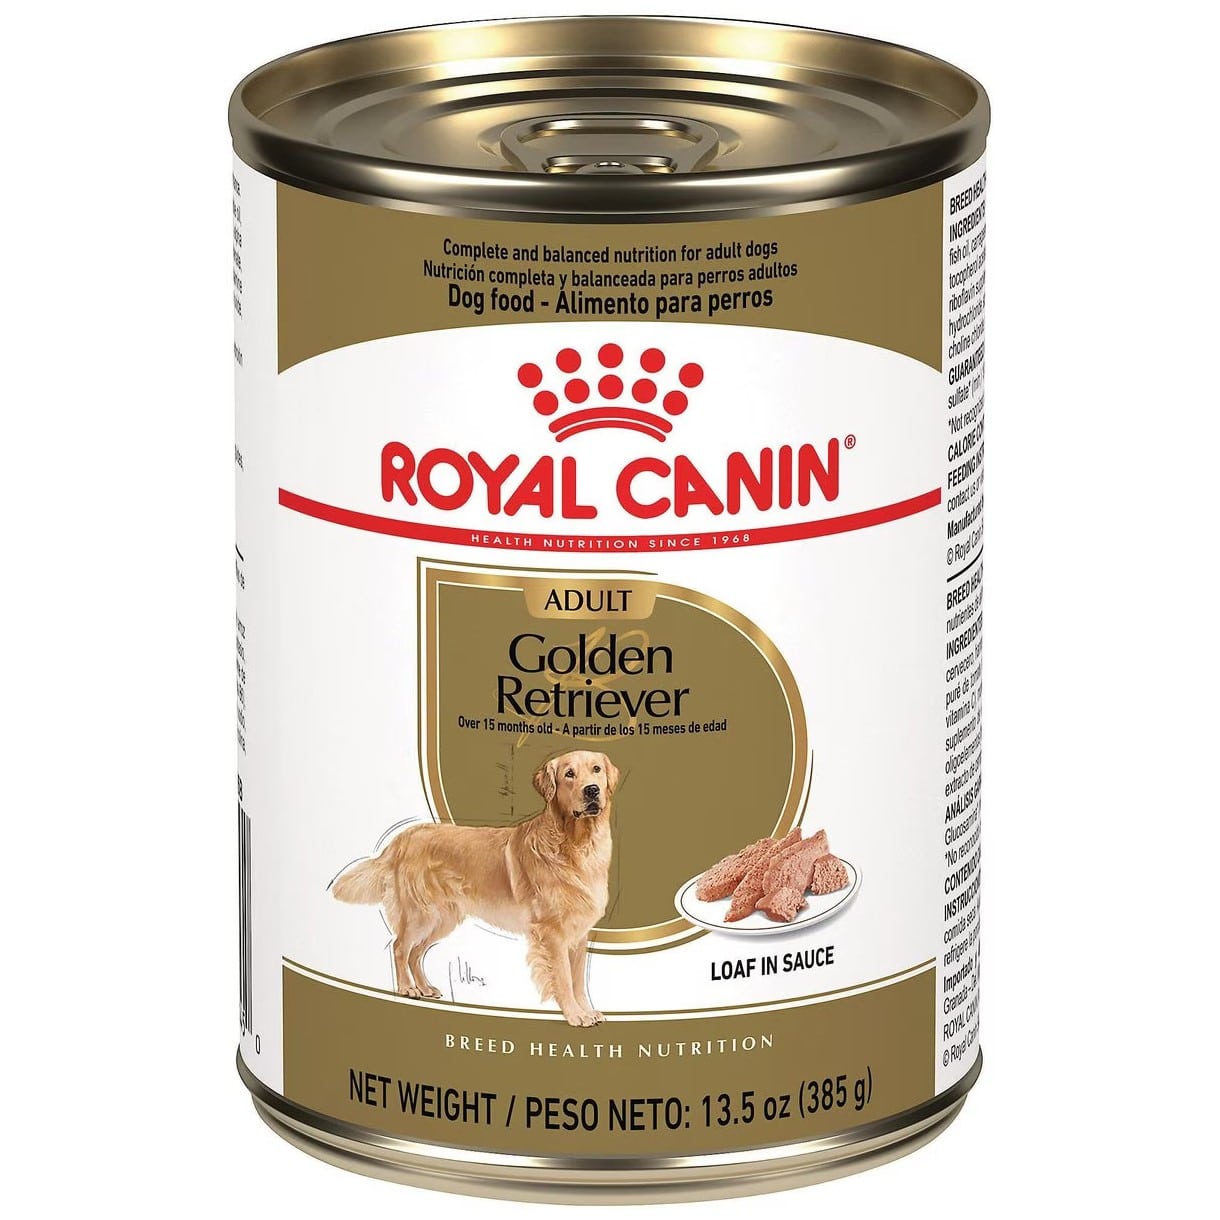 Royal Canin Breed Health Nutrition Golden Retriever Adult Loaf in Sauce Canned Dog Food